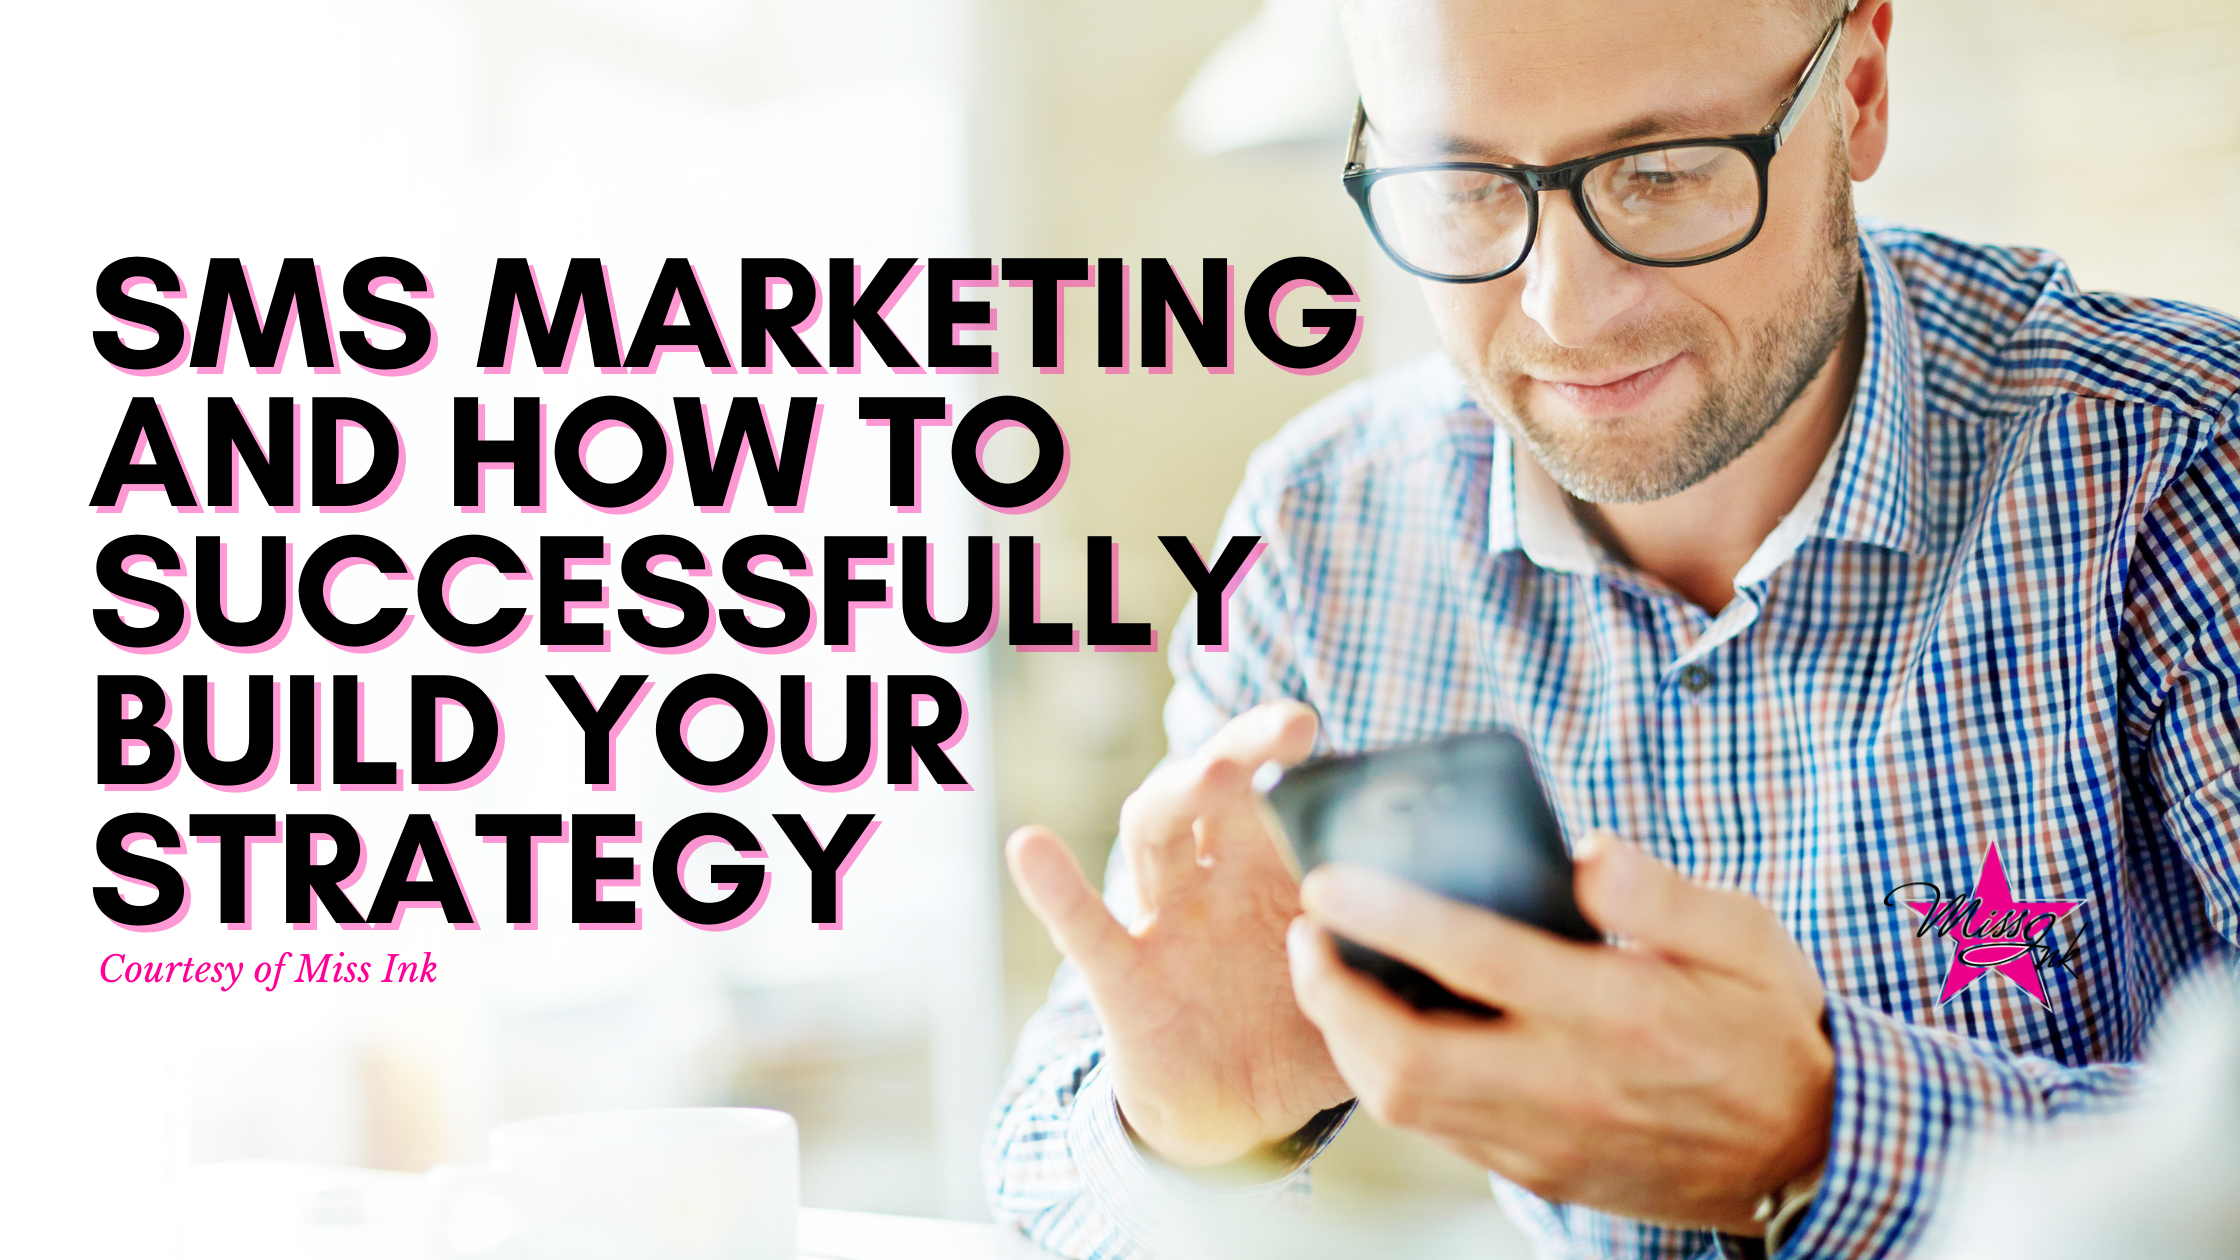 SMS Marketing And How To Successfully Build Your Strategy. 